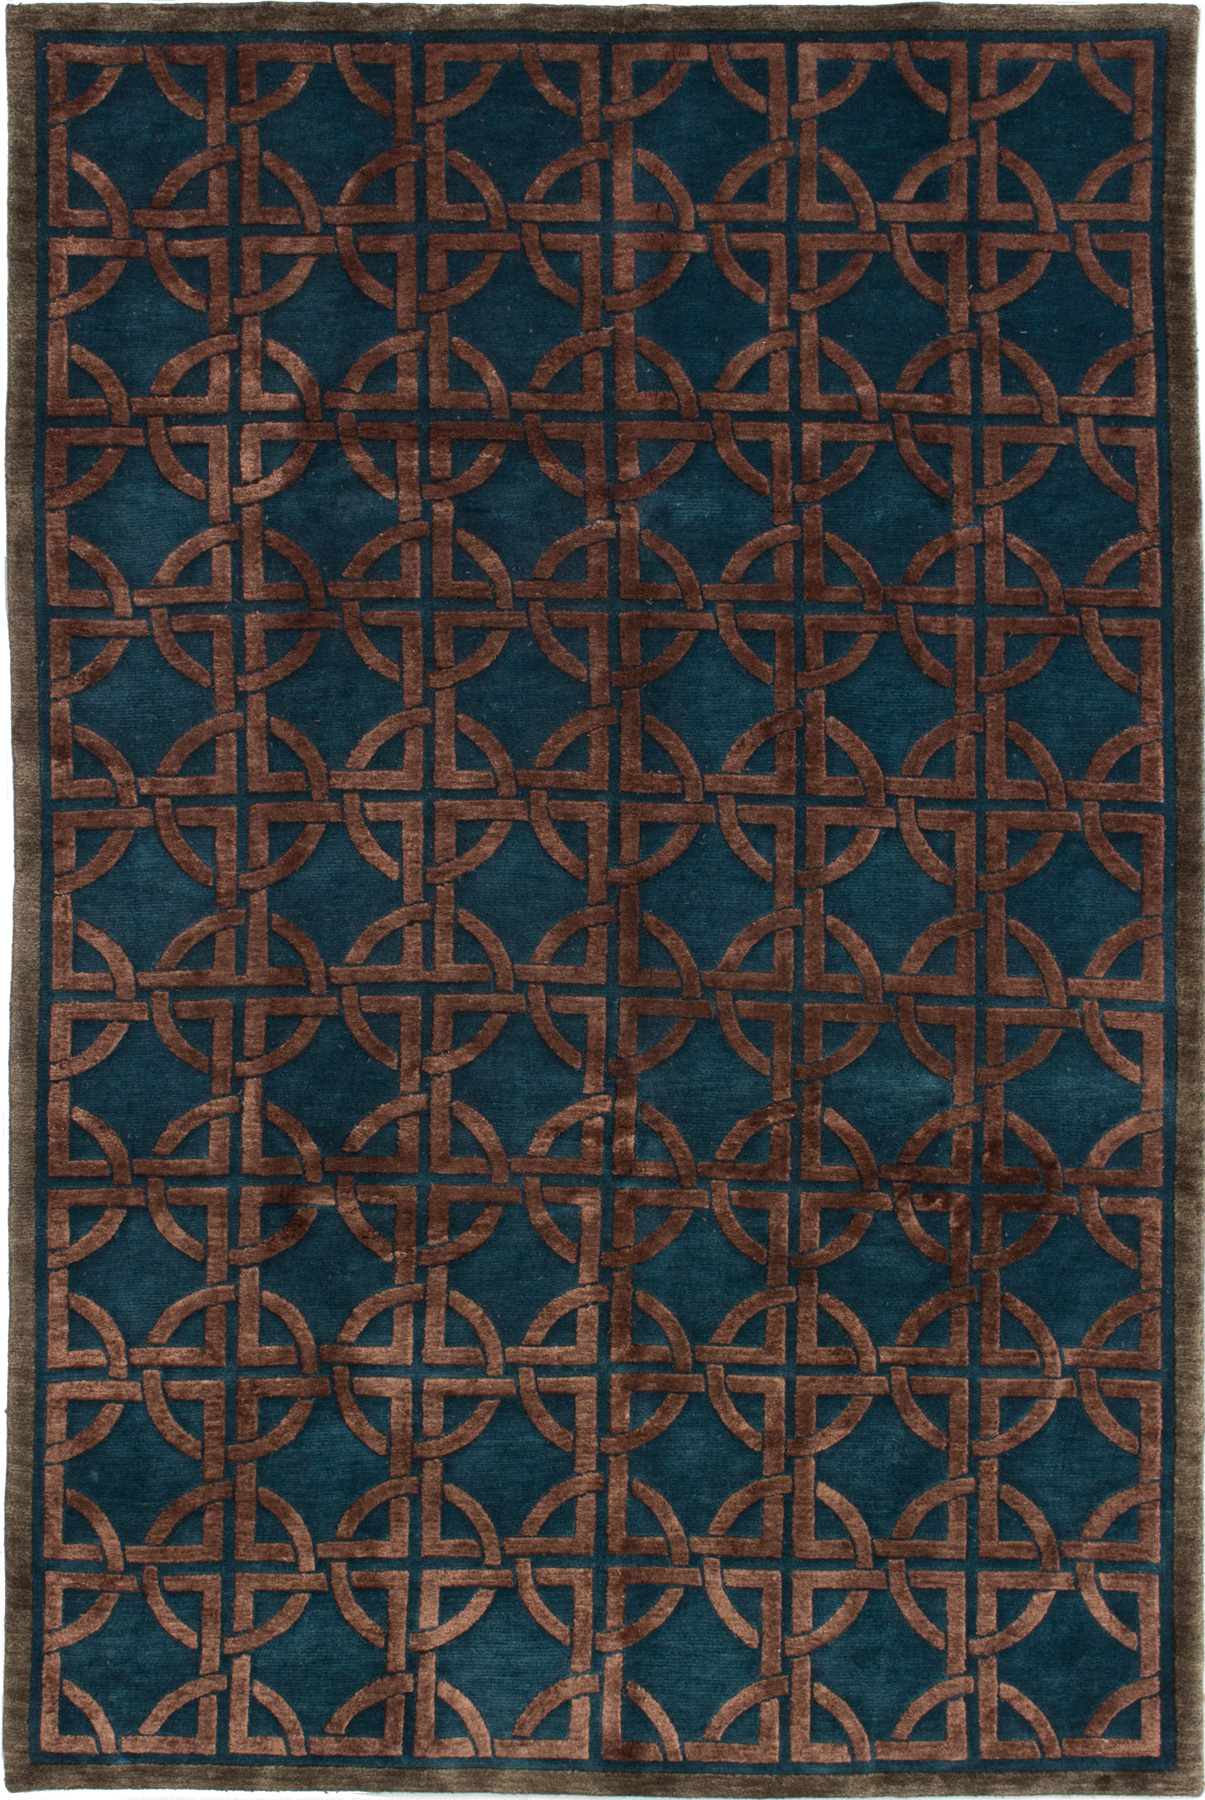 Hand-knotted Silk Touch Turquoise Wool/Silk Rug 5'7" x 8'7" Size: 5'7" x 8'7"  